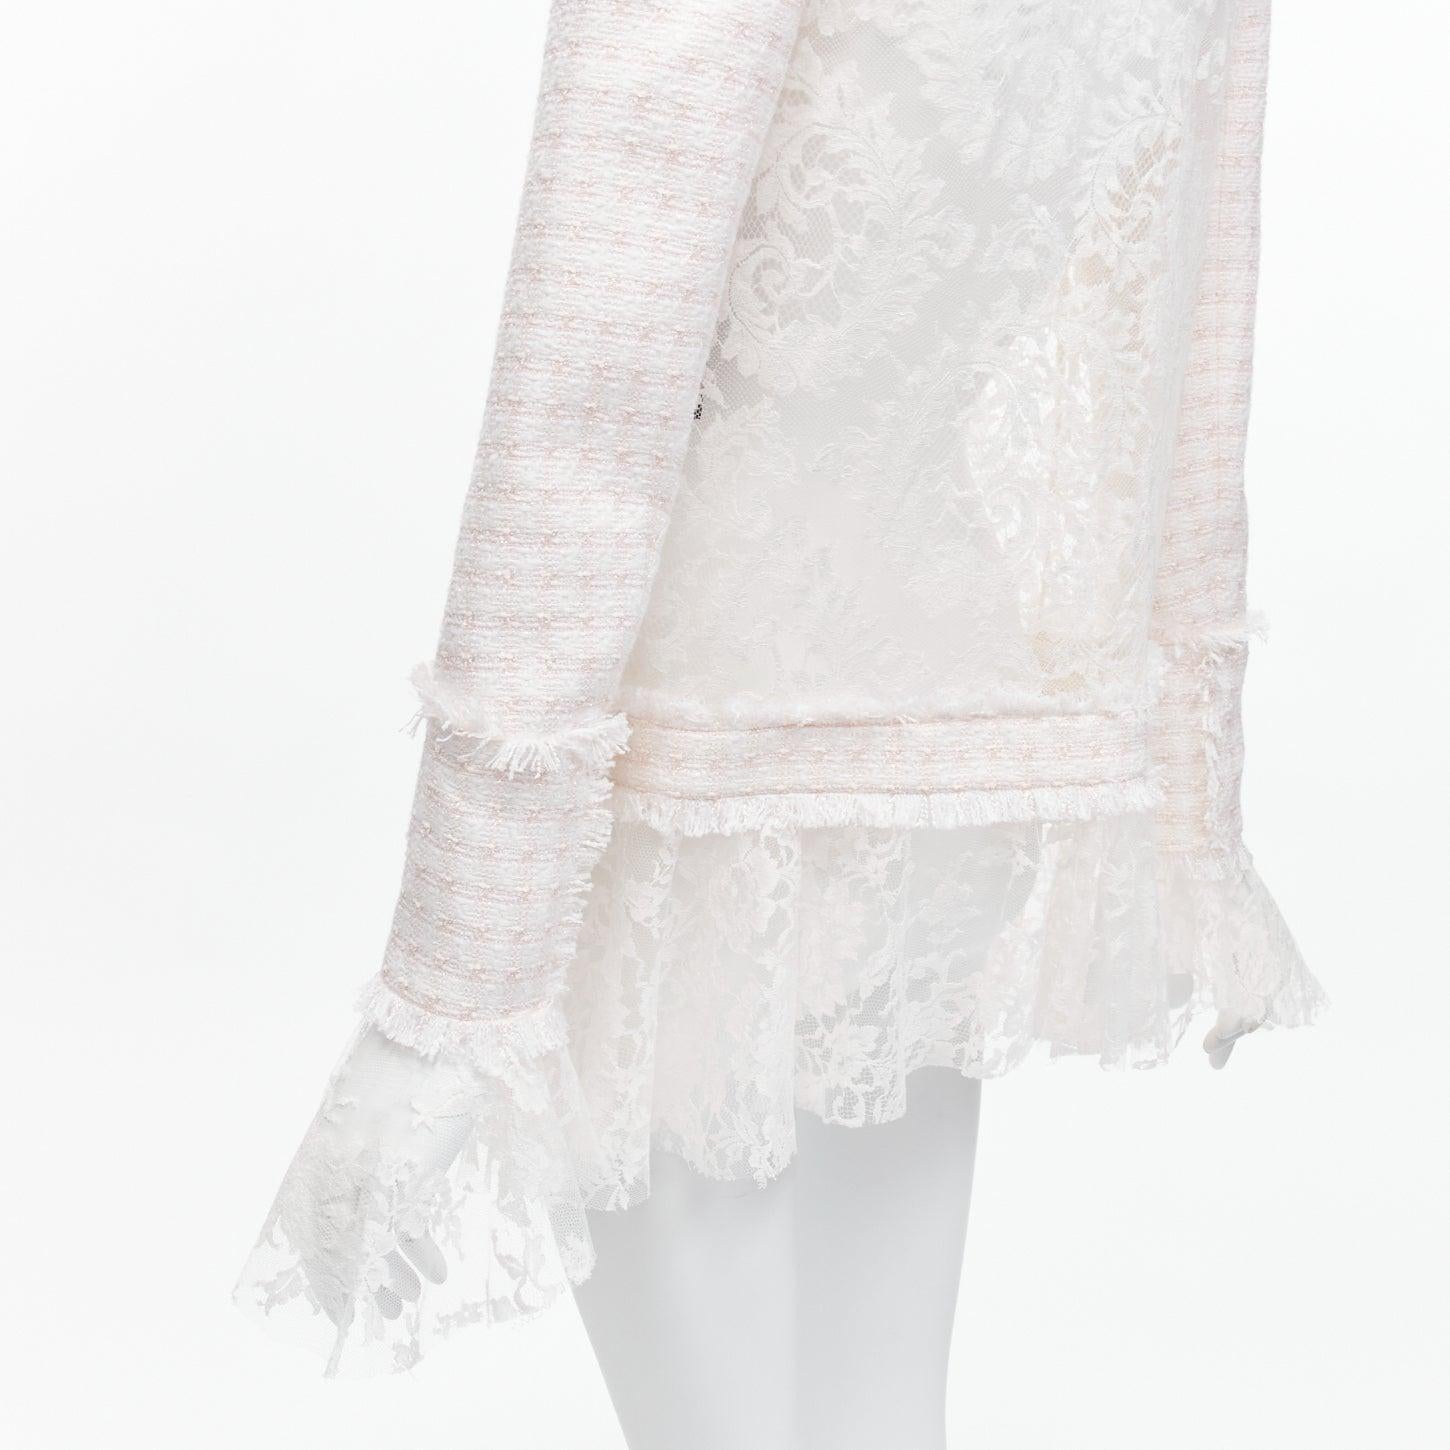 BALMAIN Spencer pink white tweed sheer lace ruffle blazer jacket FR34 XS
Reference: AAWC/A00519
Brand: Balmain
Designer: Olivier Rousteing
Model: Spencer
Material: Lace, Tweed
Color: White, Pink
Pattern: Lace
Closure: Hook & Eye
Lining: Pink